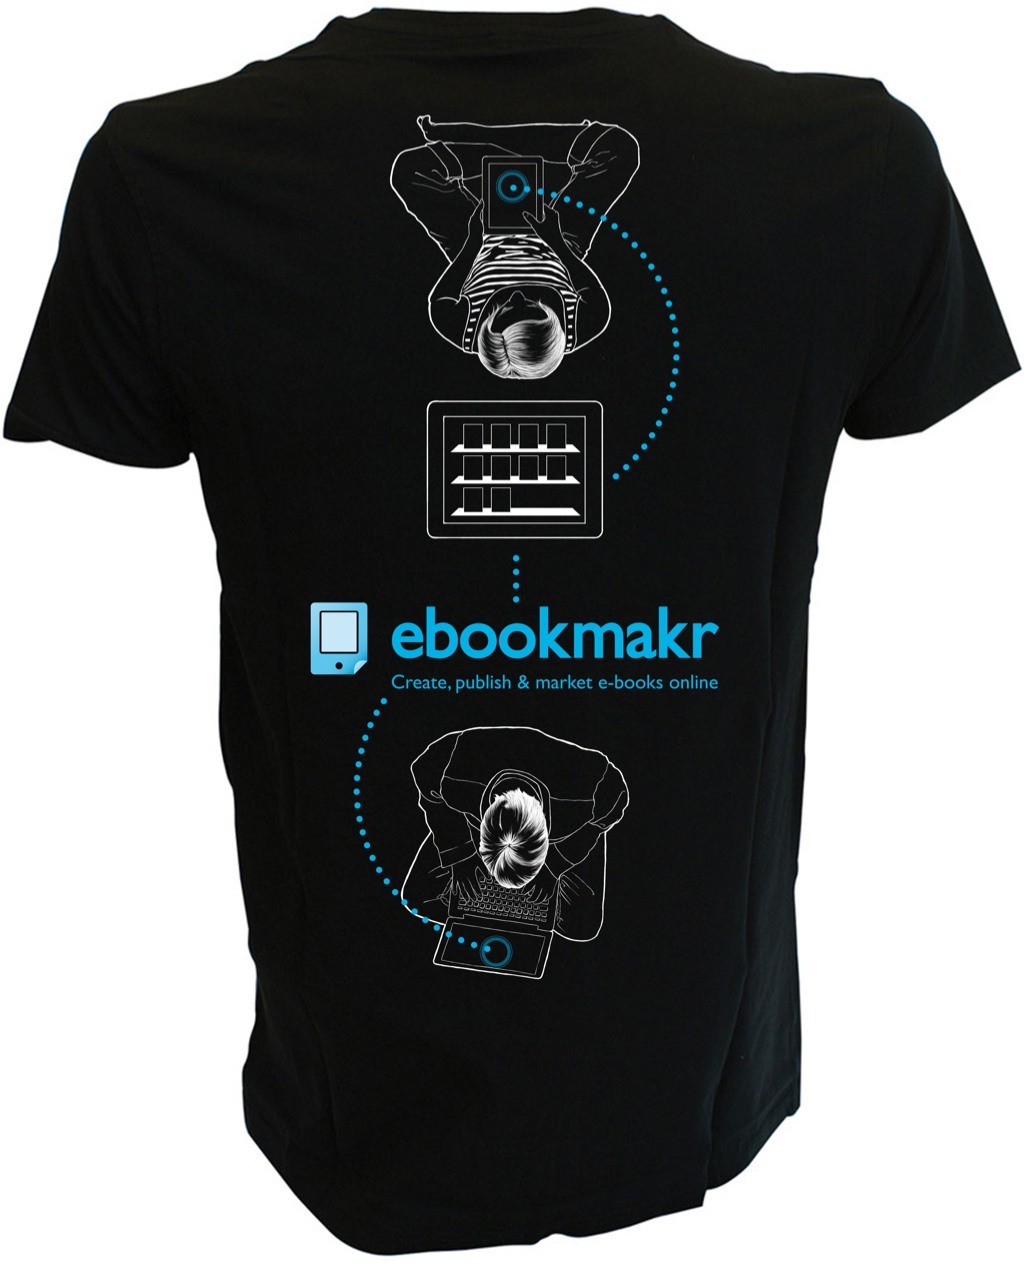 age of product: failure of ebookmakr t-shirt